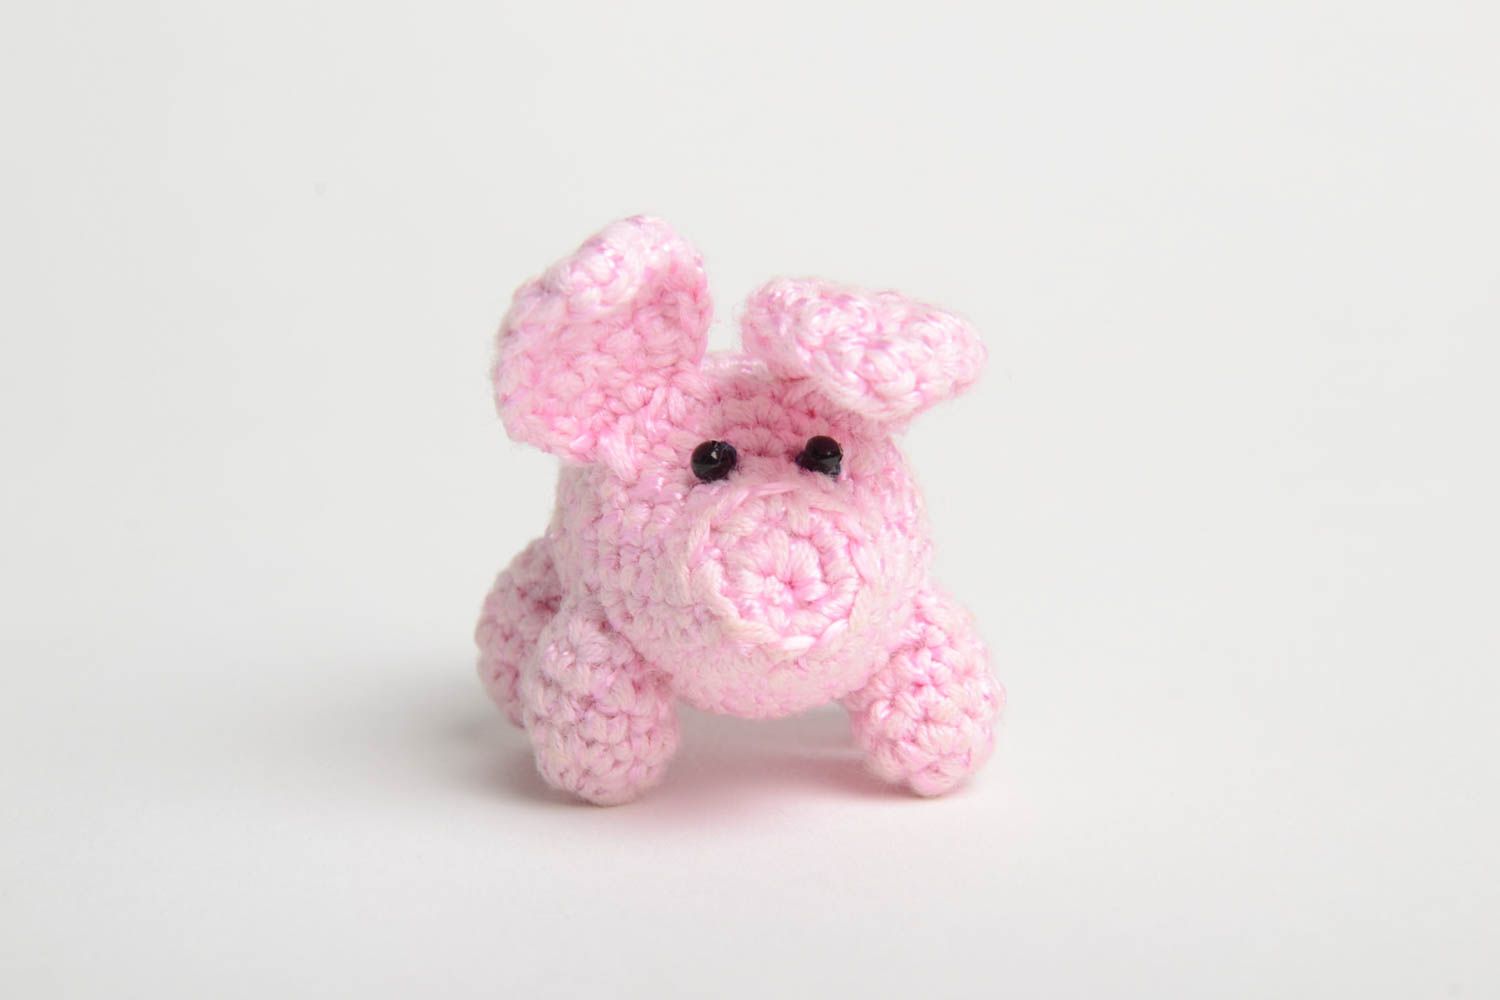 Crocheted pink soft toy cute handmade piglet soft toys children gifts ideas photo 2